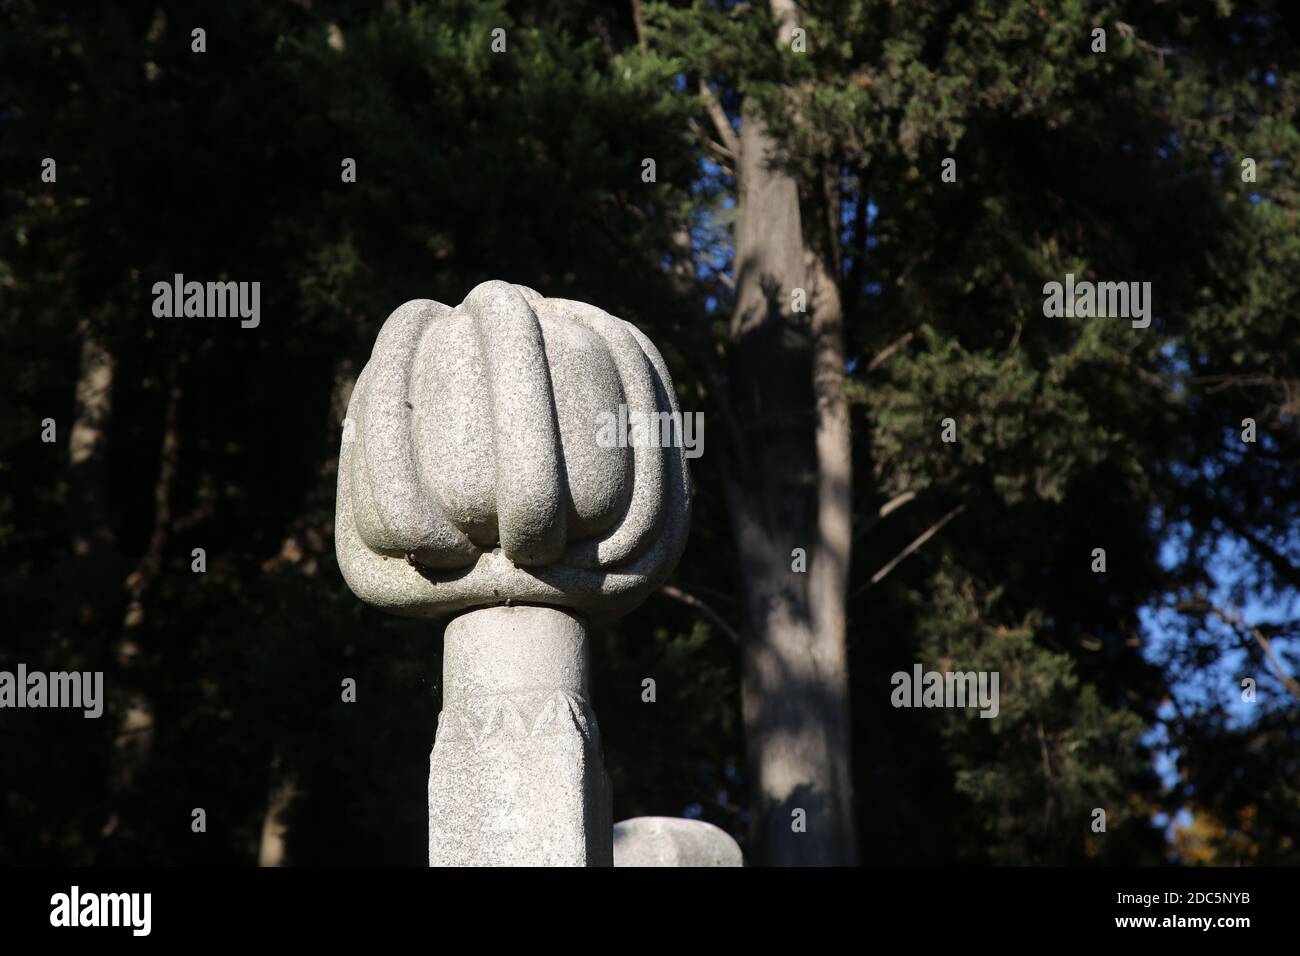 The Ottoman historic old tombstones in the Eyup cemetery, Istanbul, Turkey. Historic headstone in istanbul Stock Photo